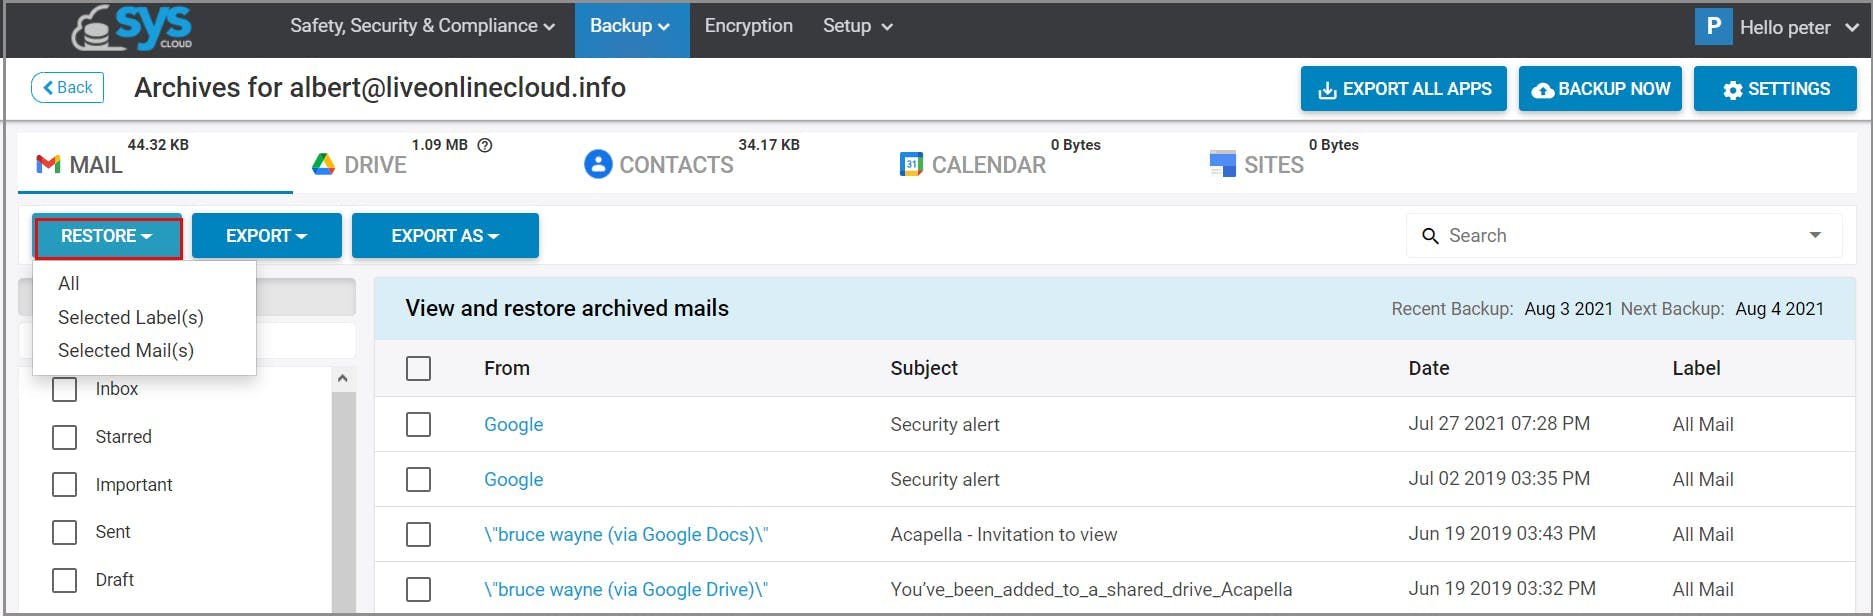 8. SysCloud email archive